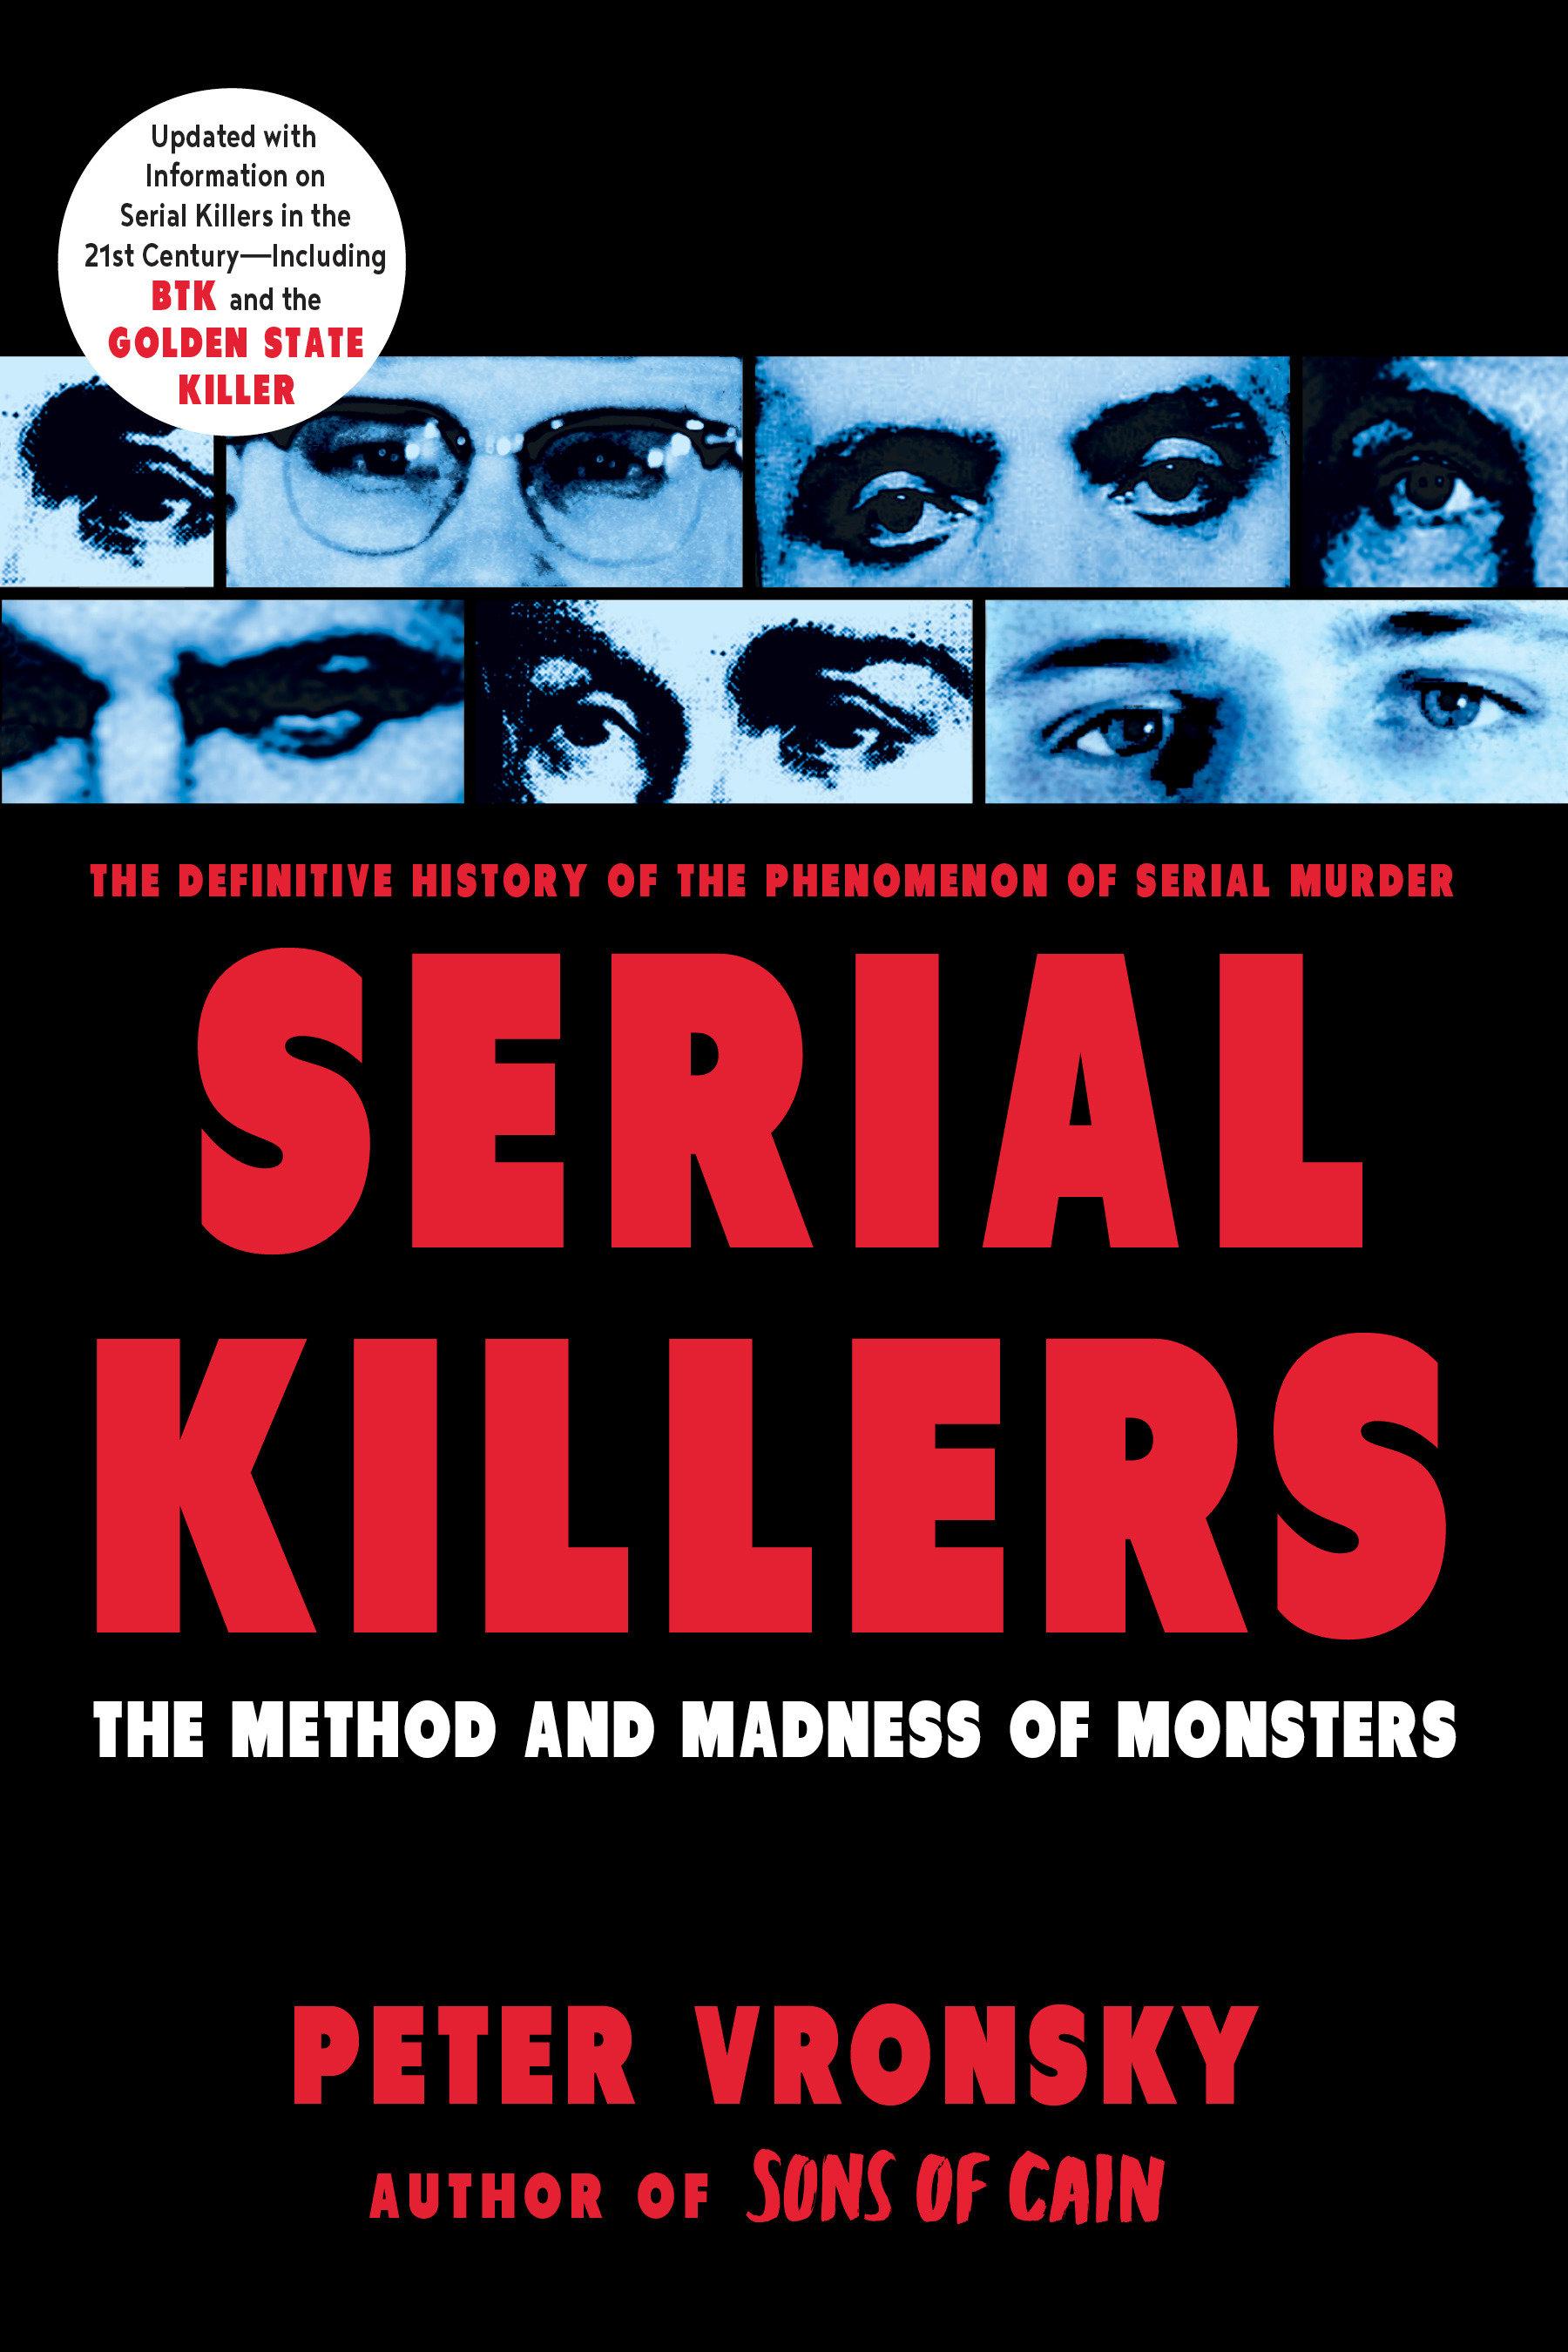 Serial Killers / The Method and Madness of Monsters / Peter Vronsky / Taschenbuch / Einband - flex.(Paperback) / Englisch / 2004 / Penguin Publishing Group / EAN 9780425196403 - Vronsky, Peter